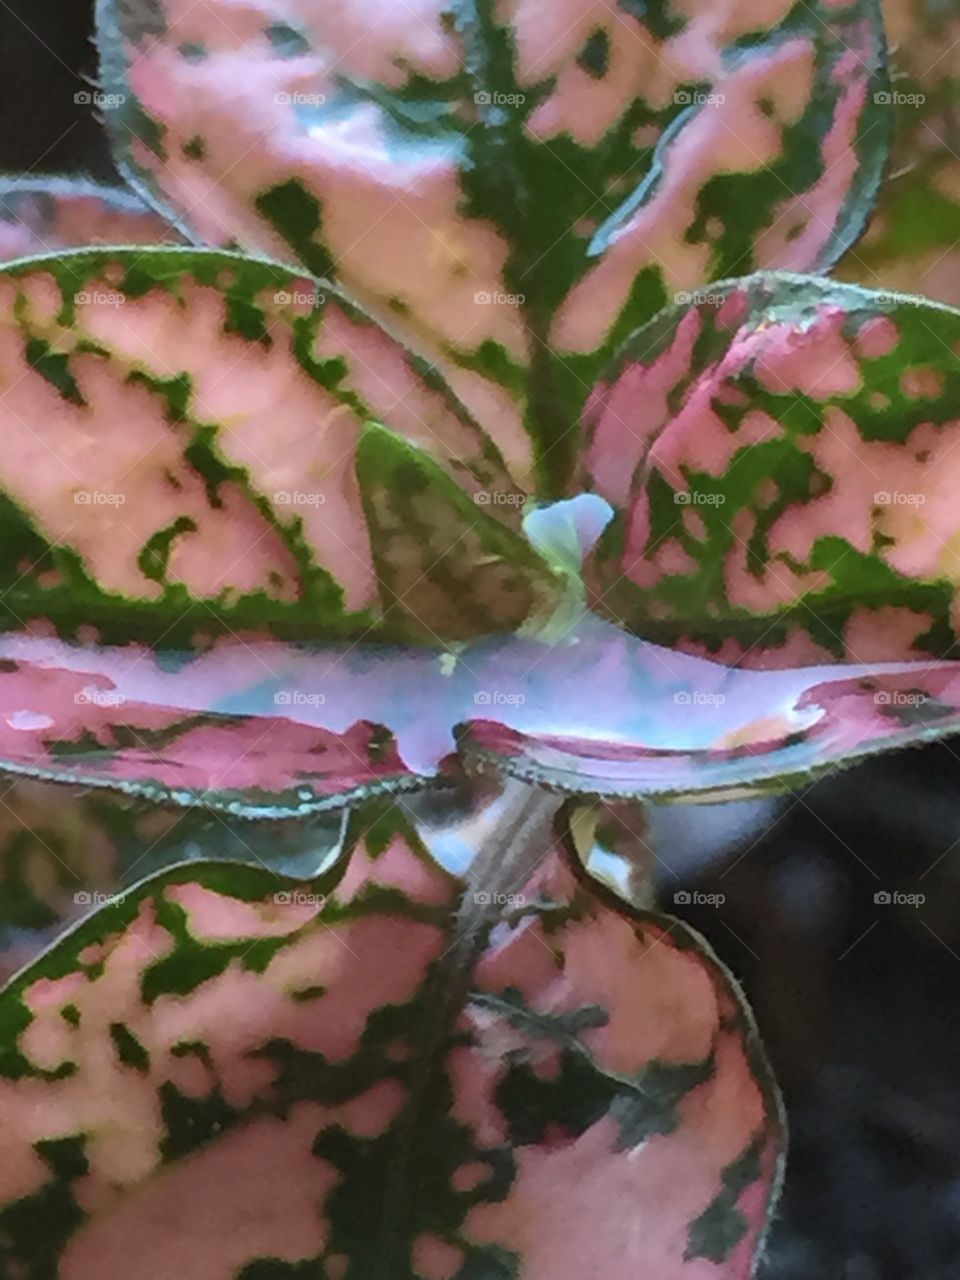 Water on pink polka dot plant